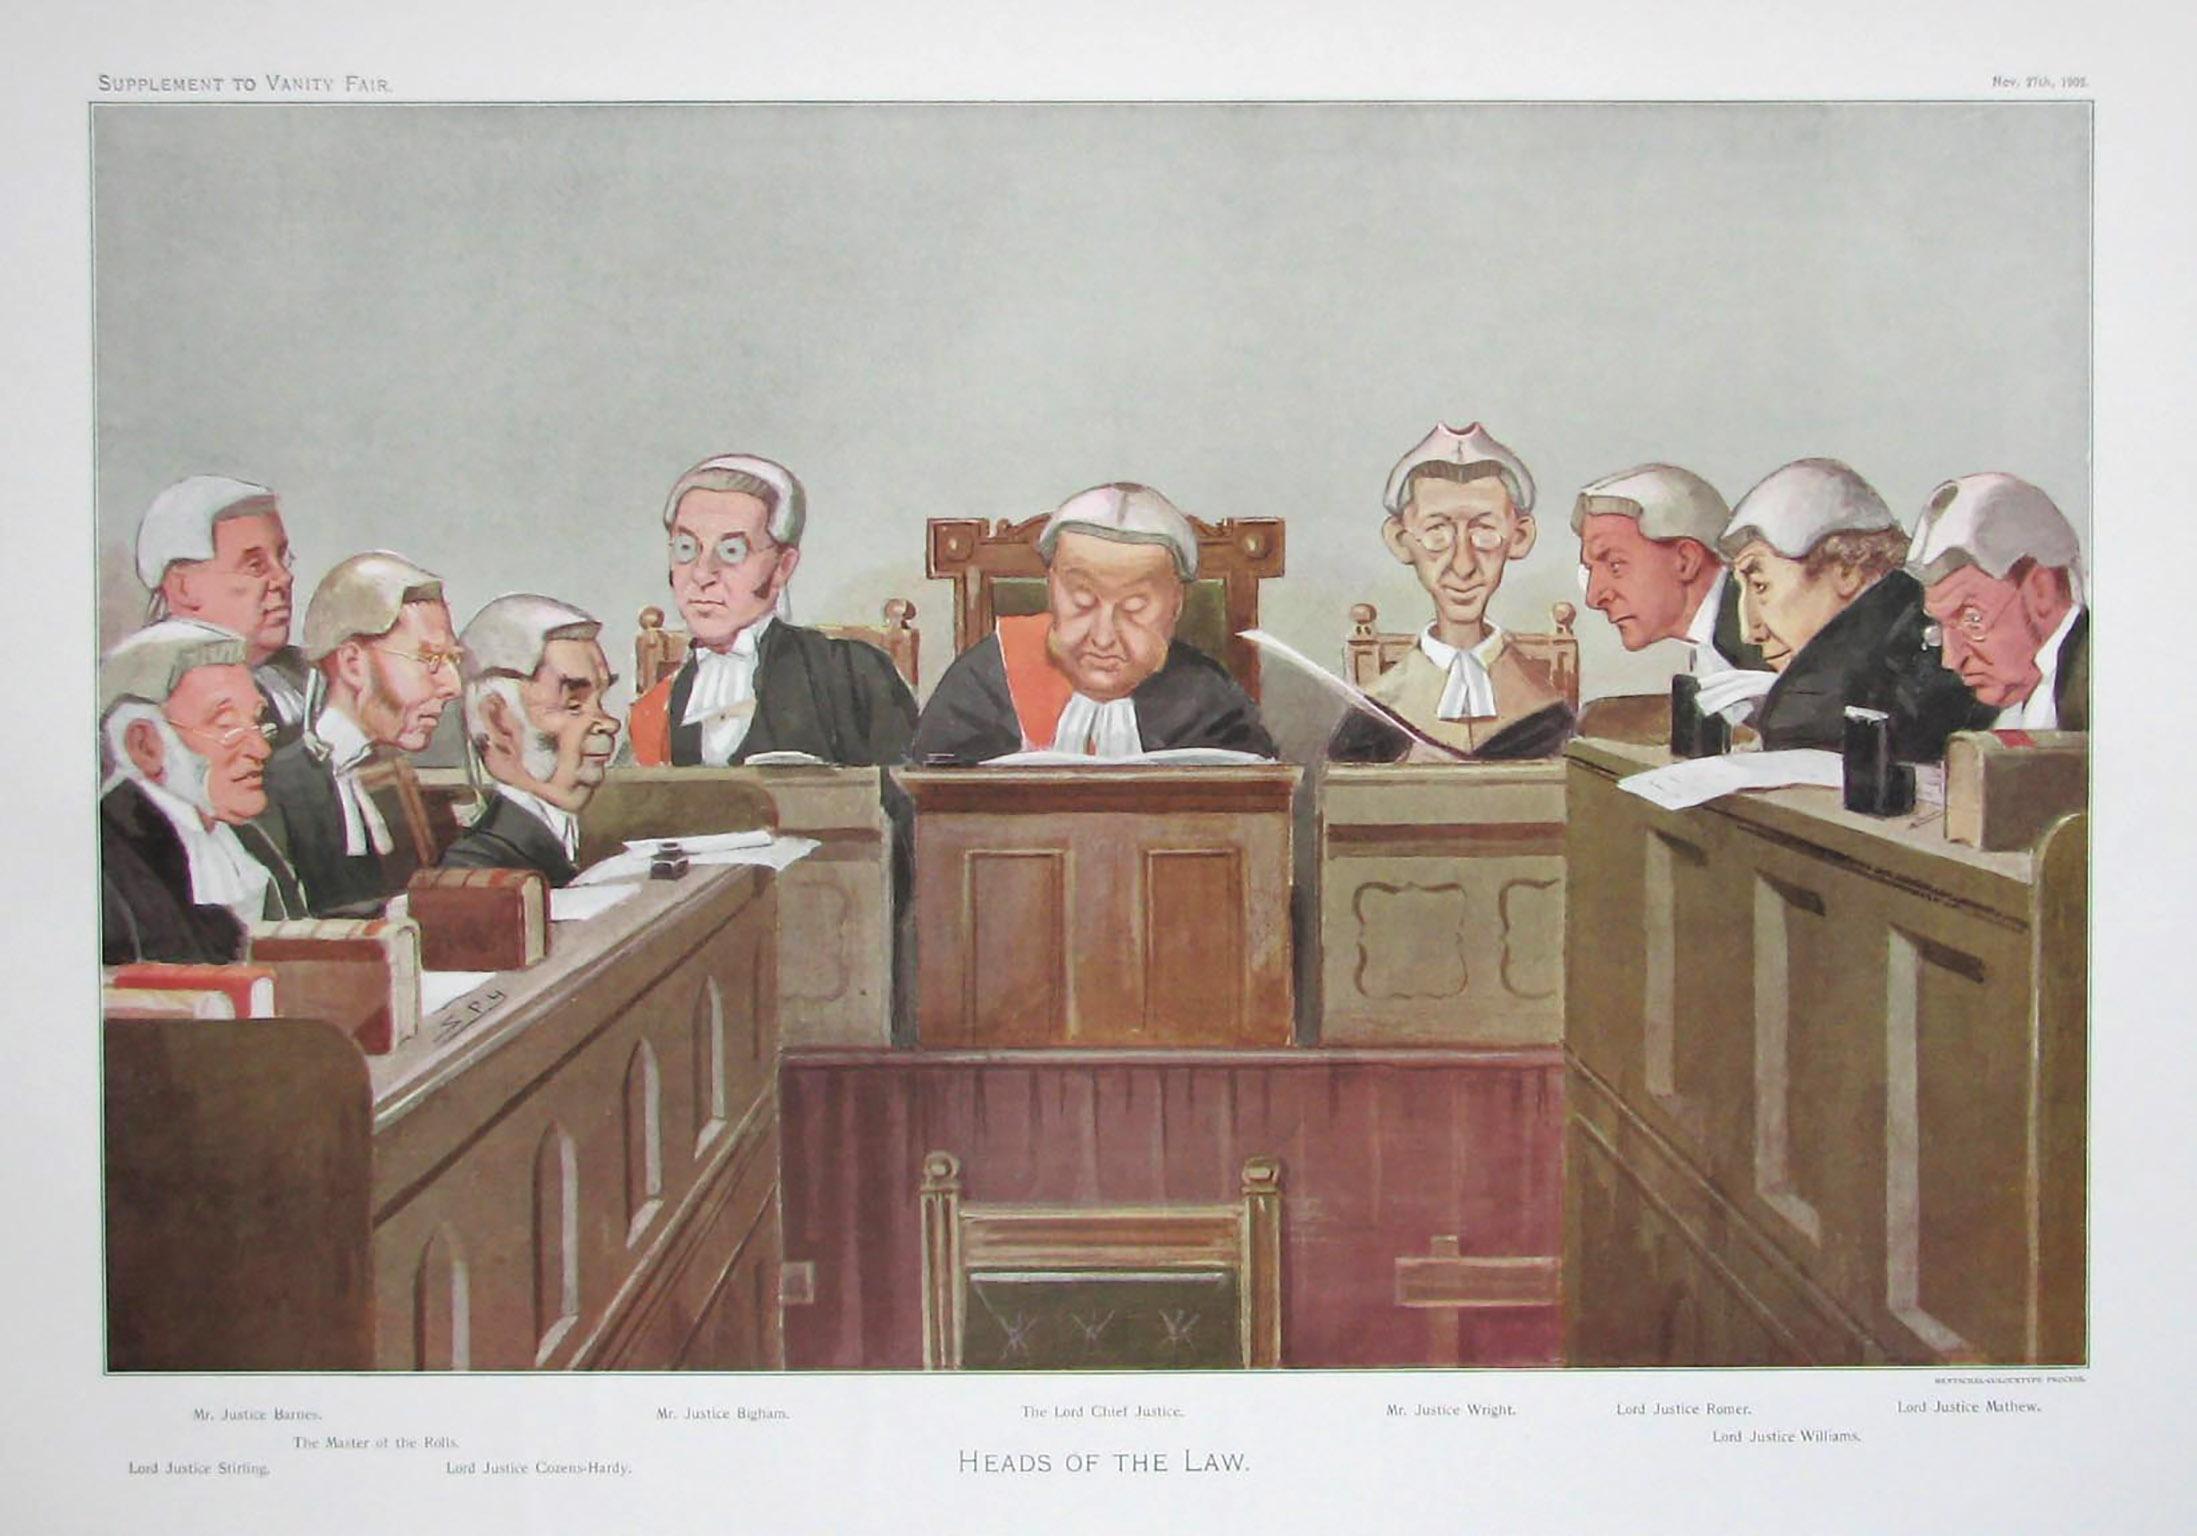 Sir Leslie Ward Figurative Print - Heads of the Law, Vanity Fair legal chromolithograph of judges, 1902